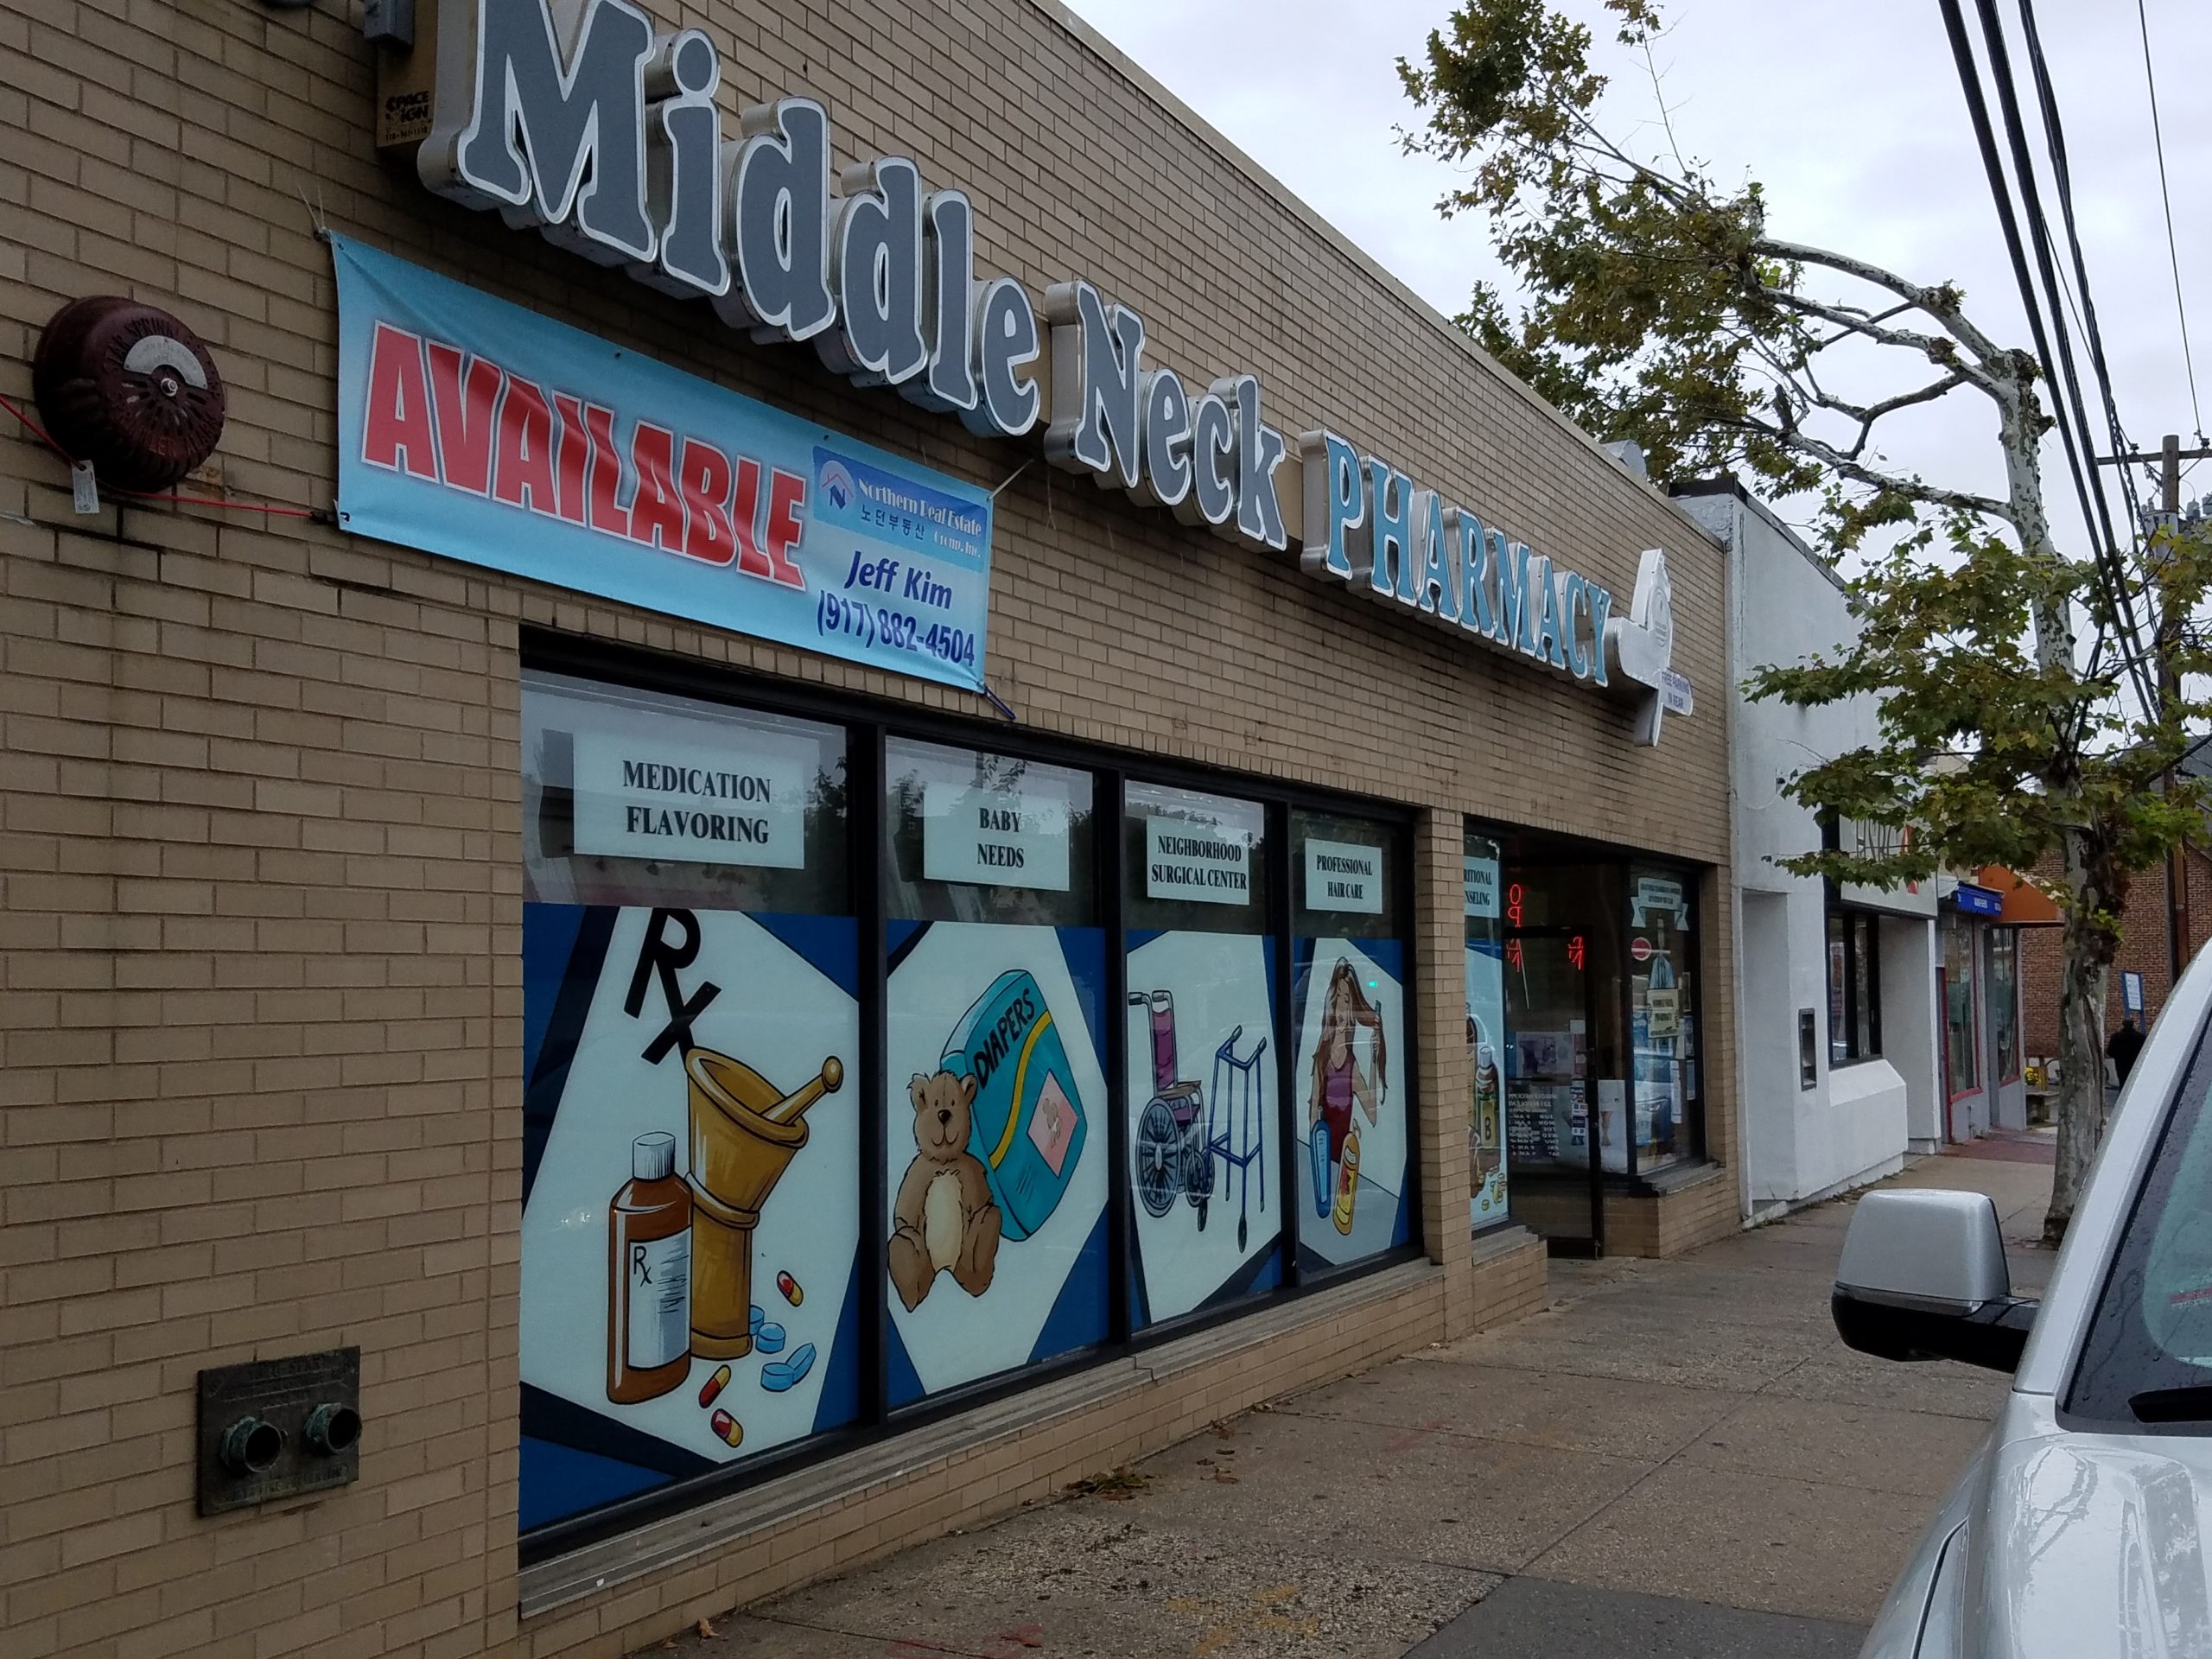 Middle Neck Pharmacy is ending its pharmaceutical business and is likely to close their doors early next year. (Photo by Janelle Clausen)